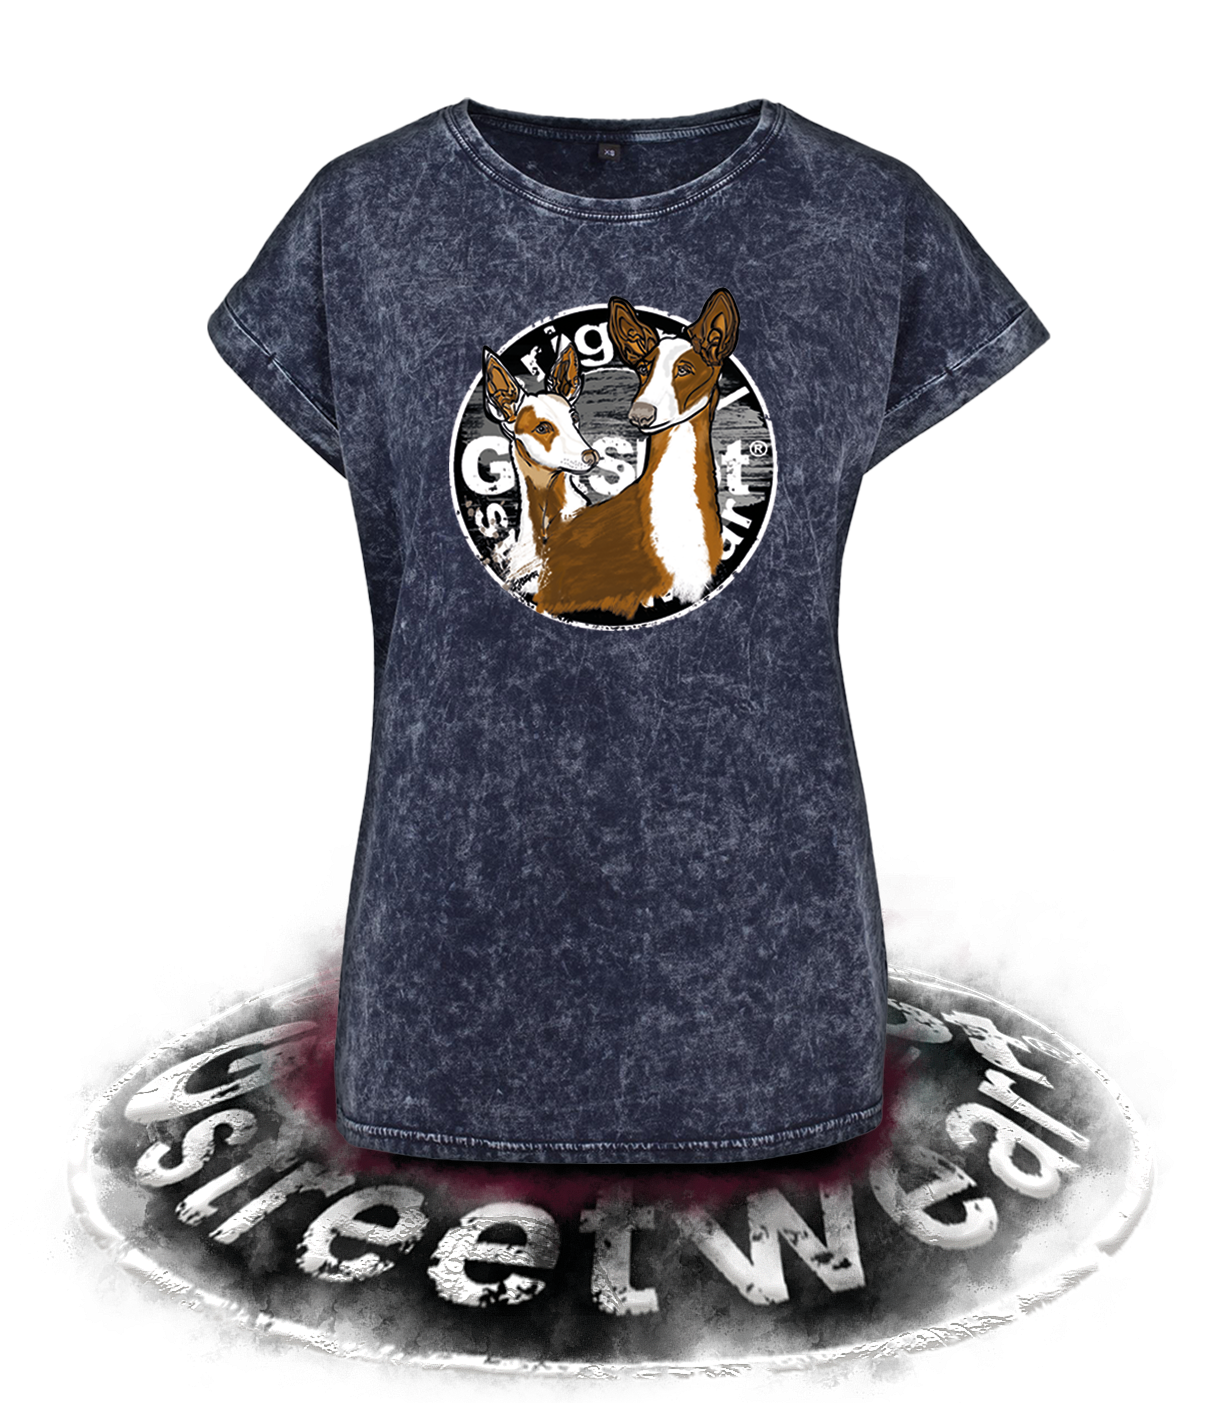 SAVE THE PODENCOS LADIES ACID WASHED T-SHIRT